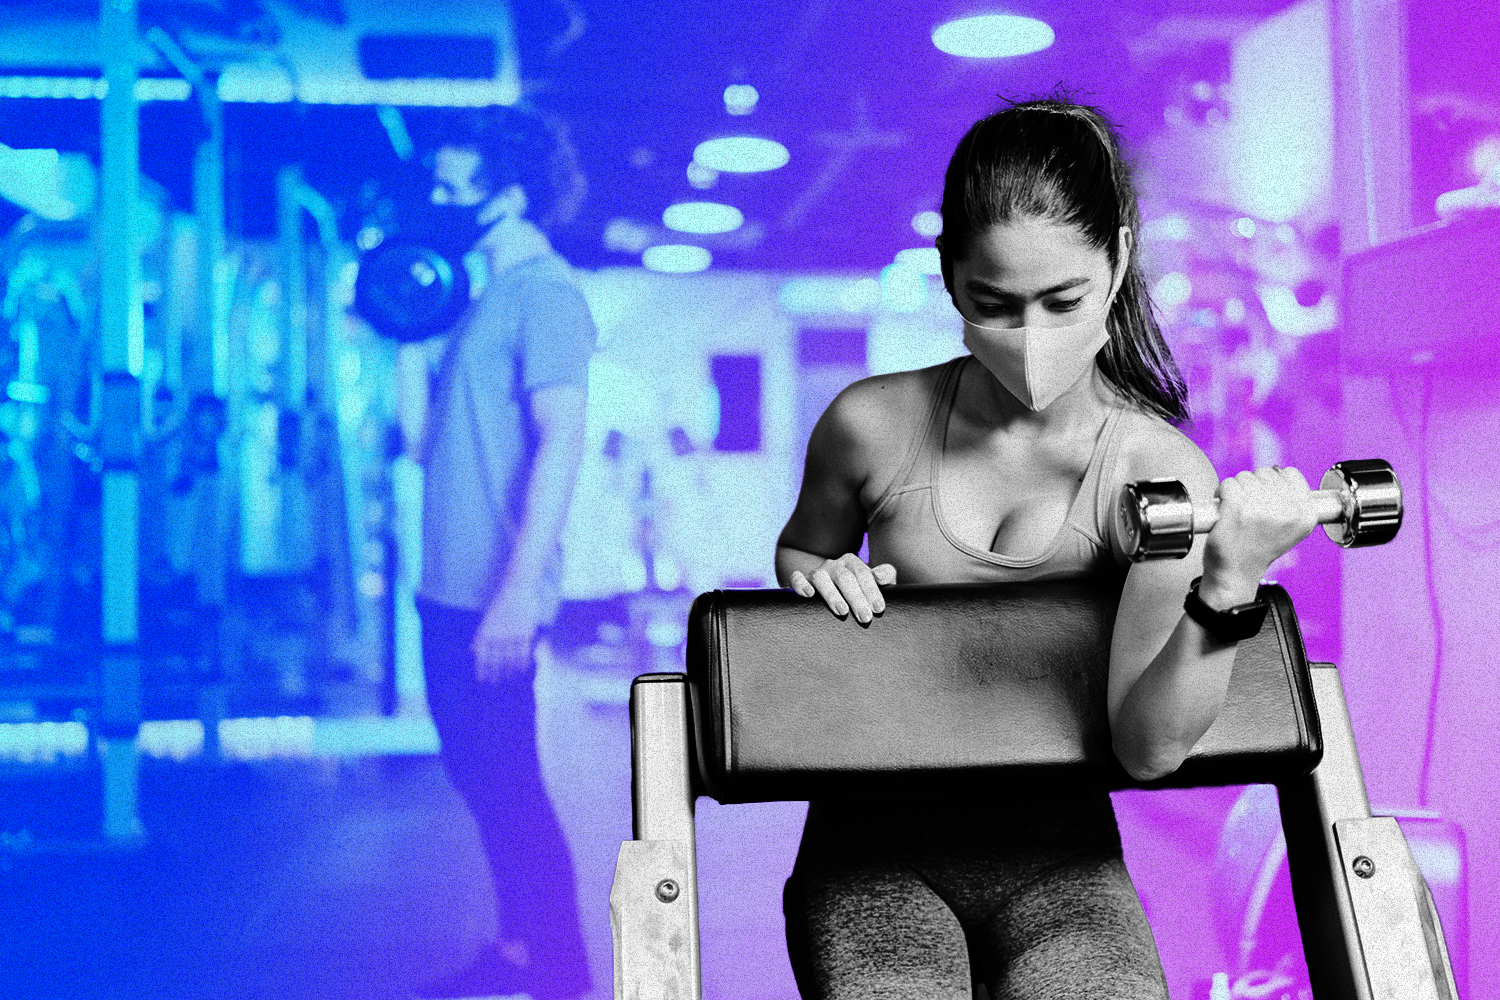 Please Just Leave Women at the Gym Alone